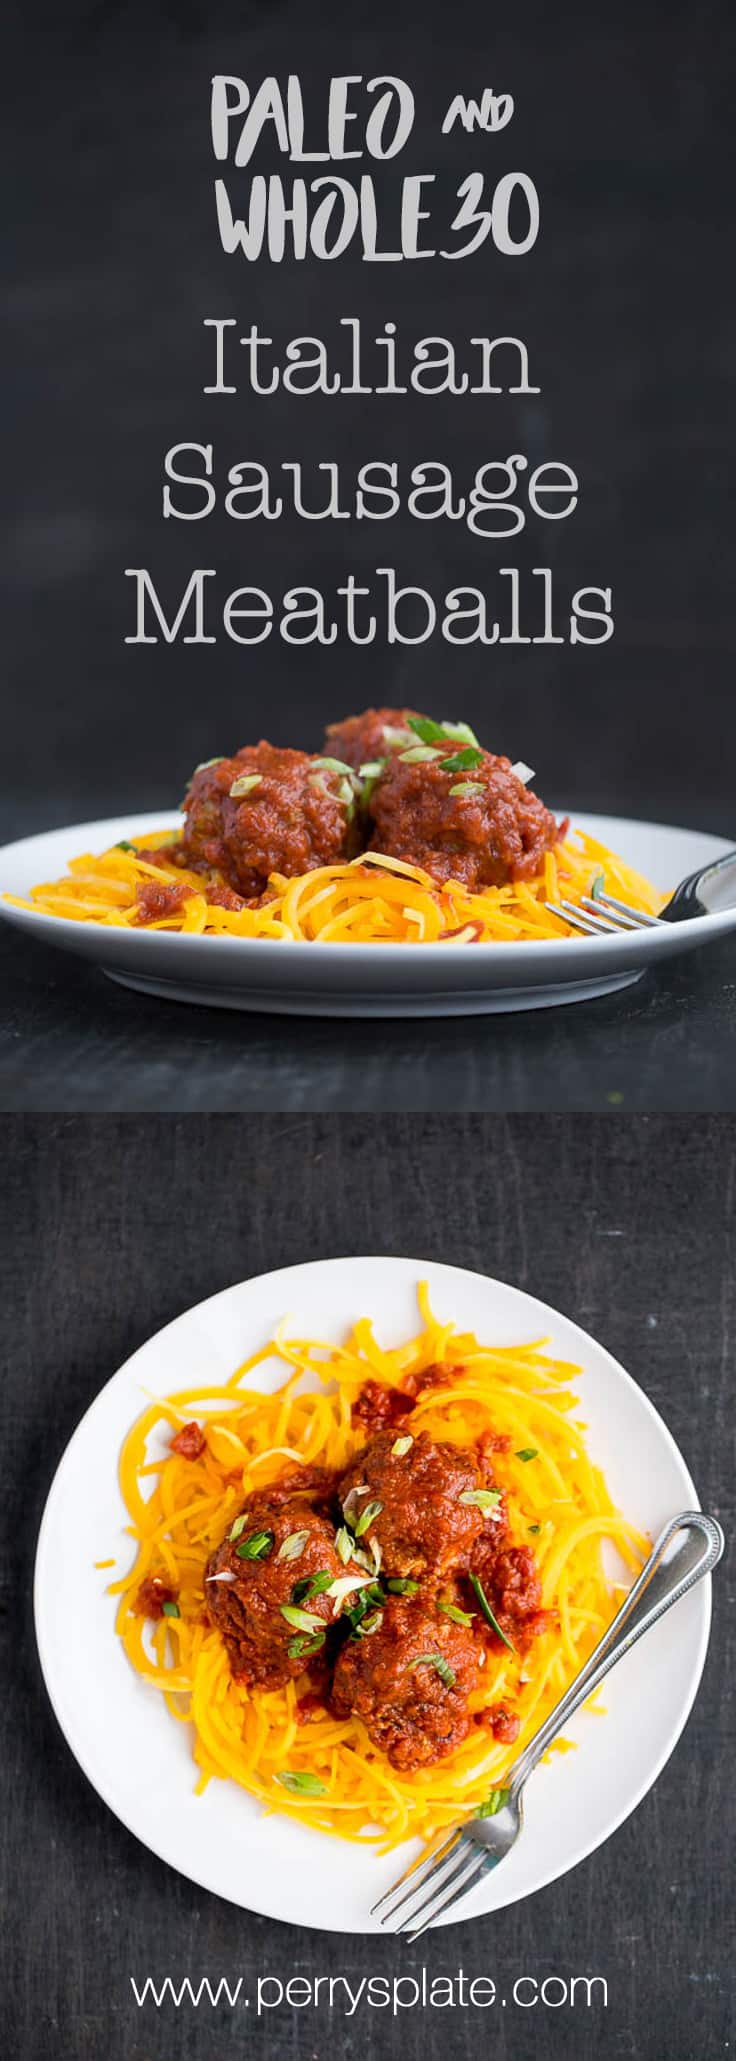 Easy Italian Sausage Meatballs + Squash Noodles - Perry's Plate